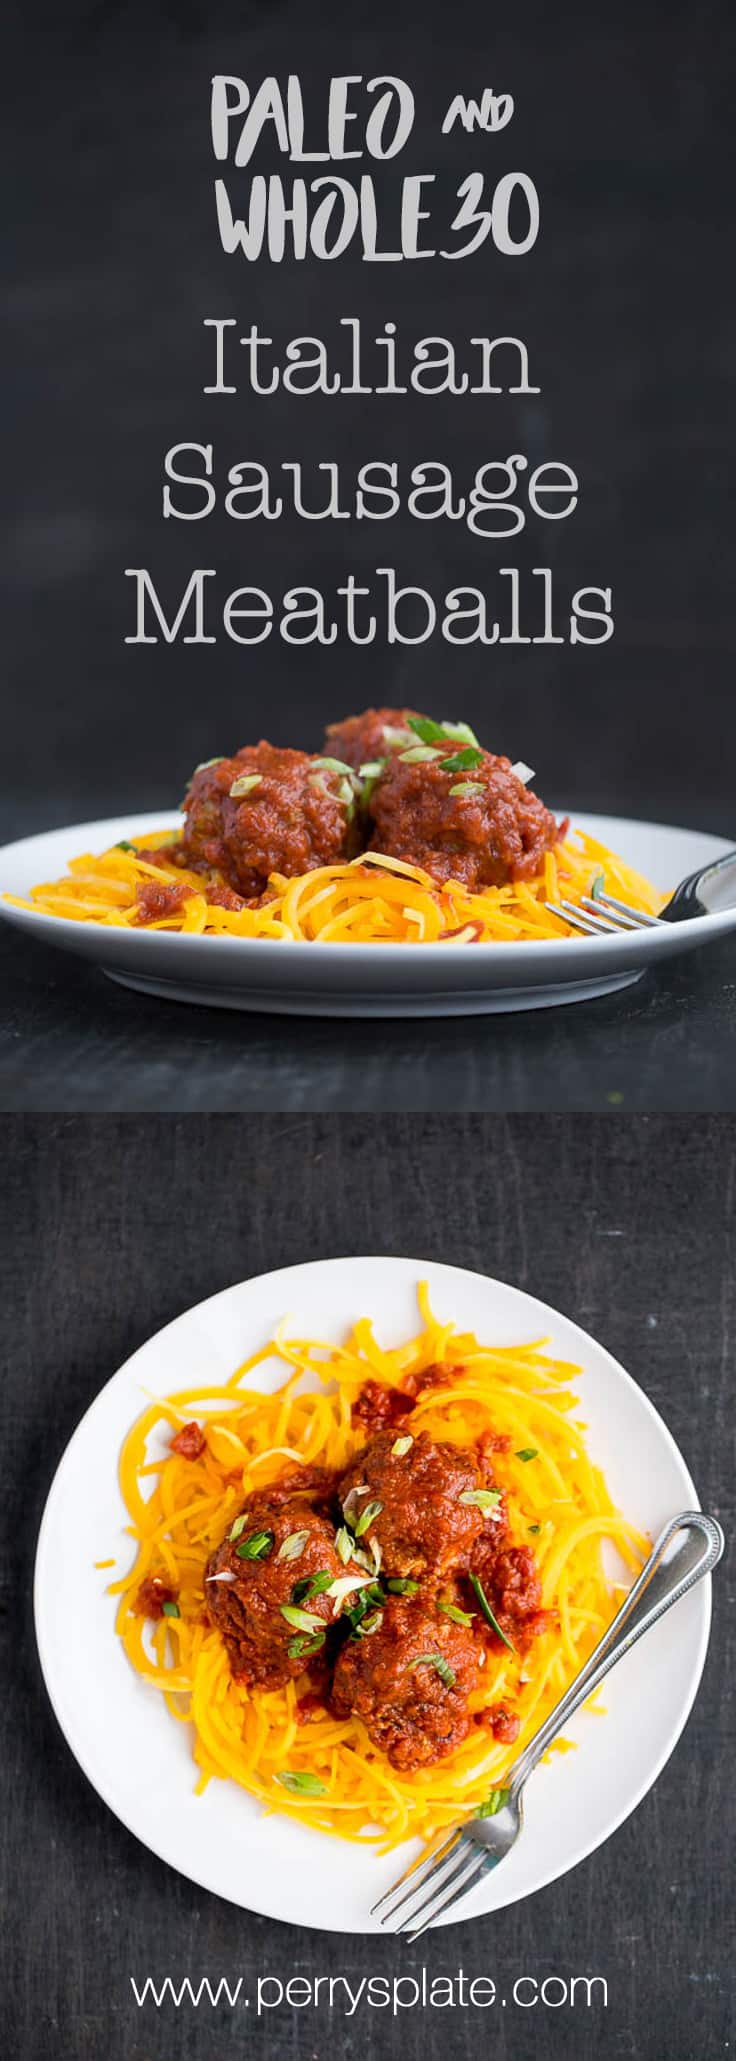 Easy Italian Sausage Meatballs + Squash Noodles - Perry's Plate